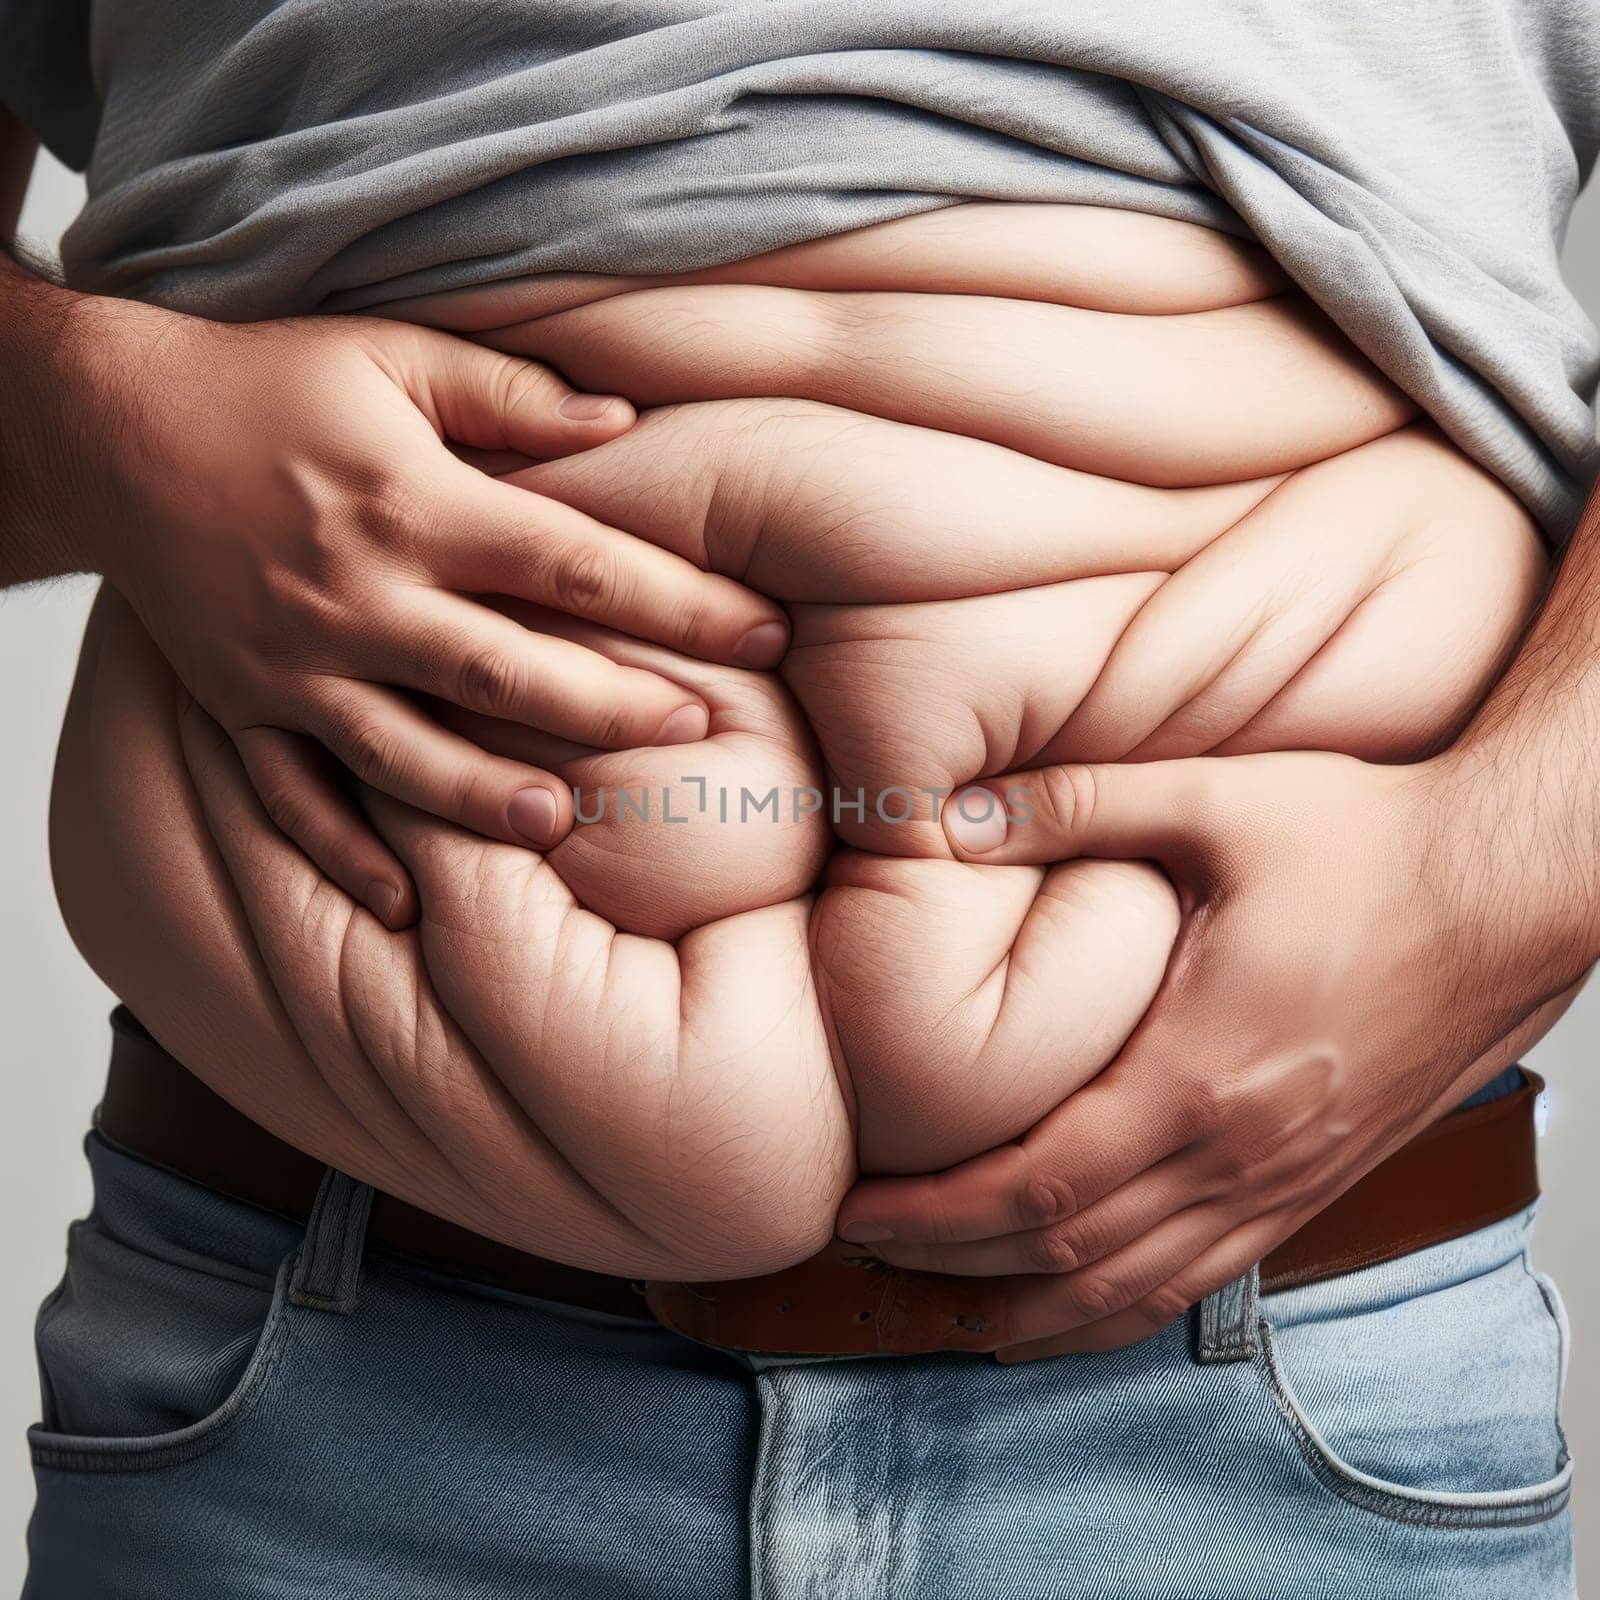 A close-up of a person midsection with their hands holding their stomach. The person is wearing a gray shirt and blue jeans. Overweight and obesity concept. Folds of belly fat